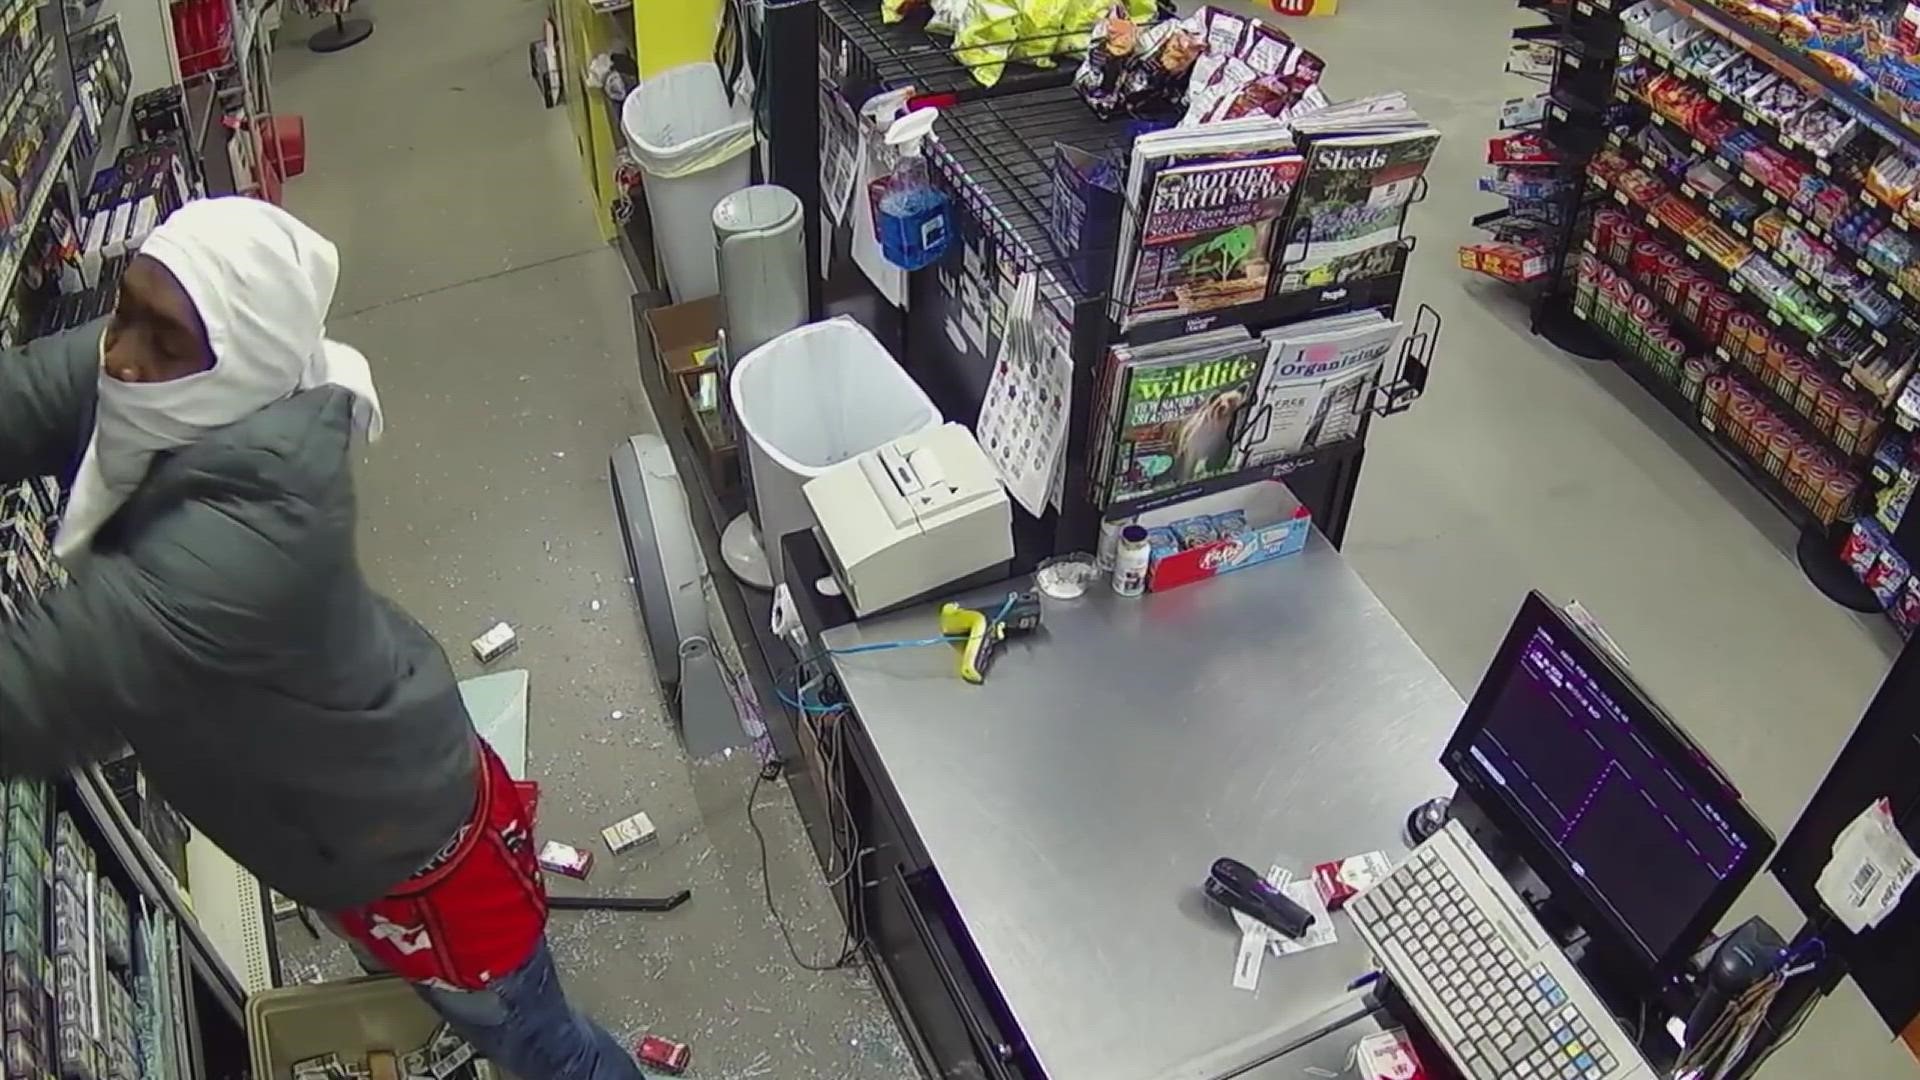 Two males were seen on surveillance footage breaking into the store and stealing items.